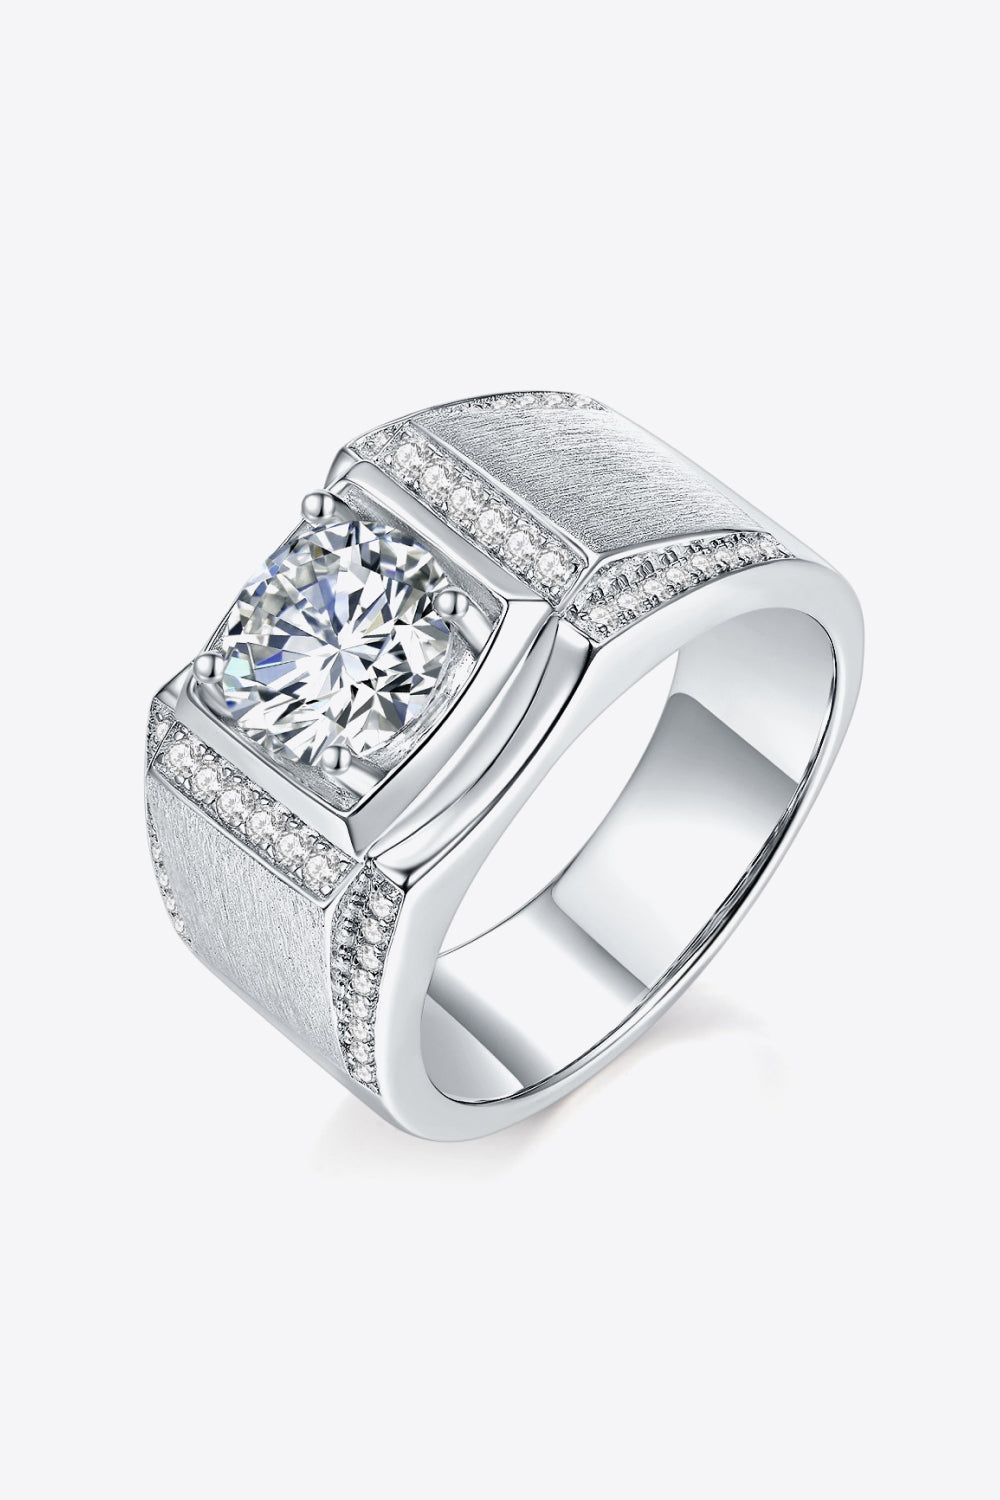 So Charmed 1 Carat Moissanite Ring - Thandynie